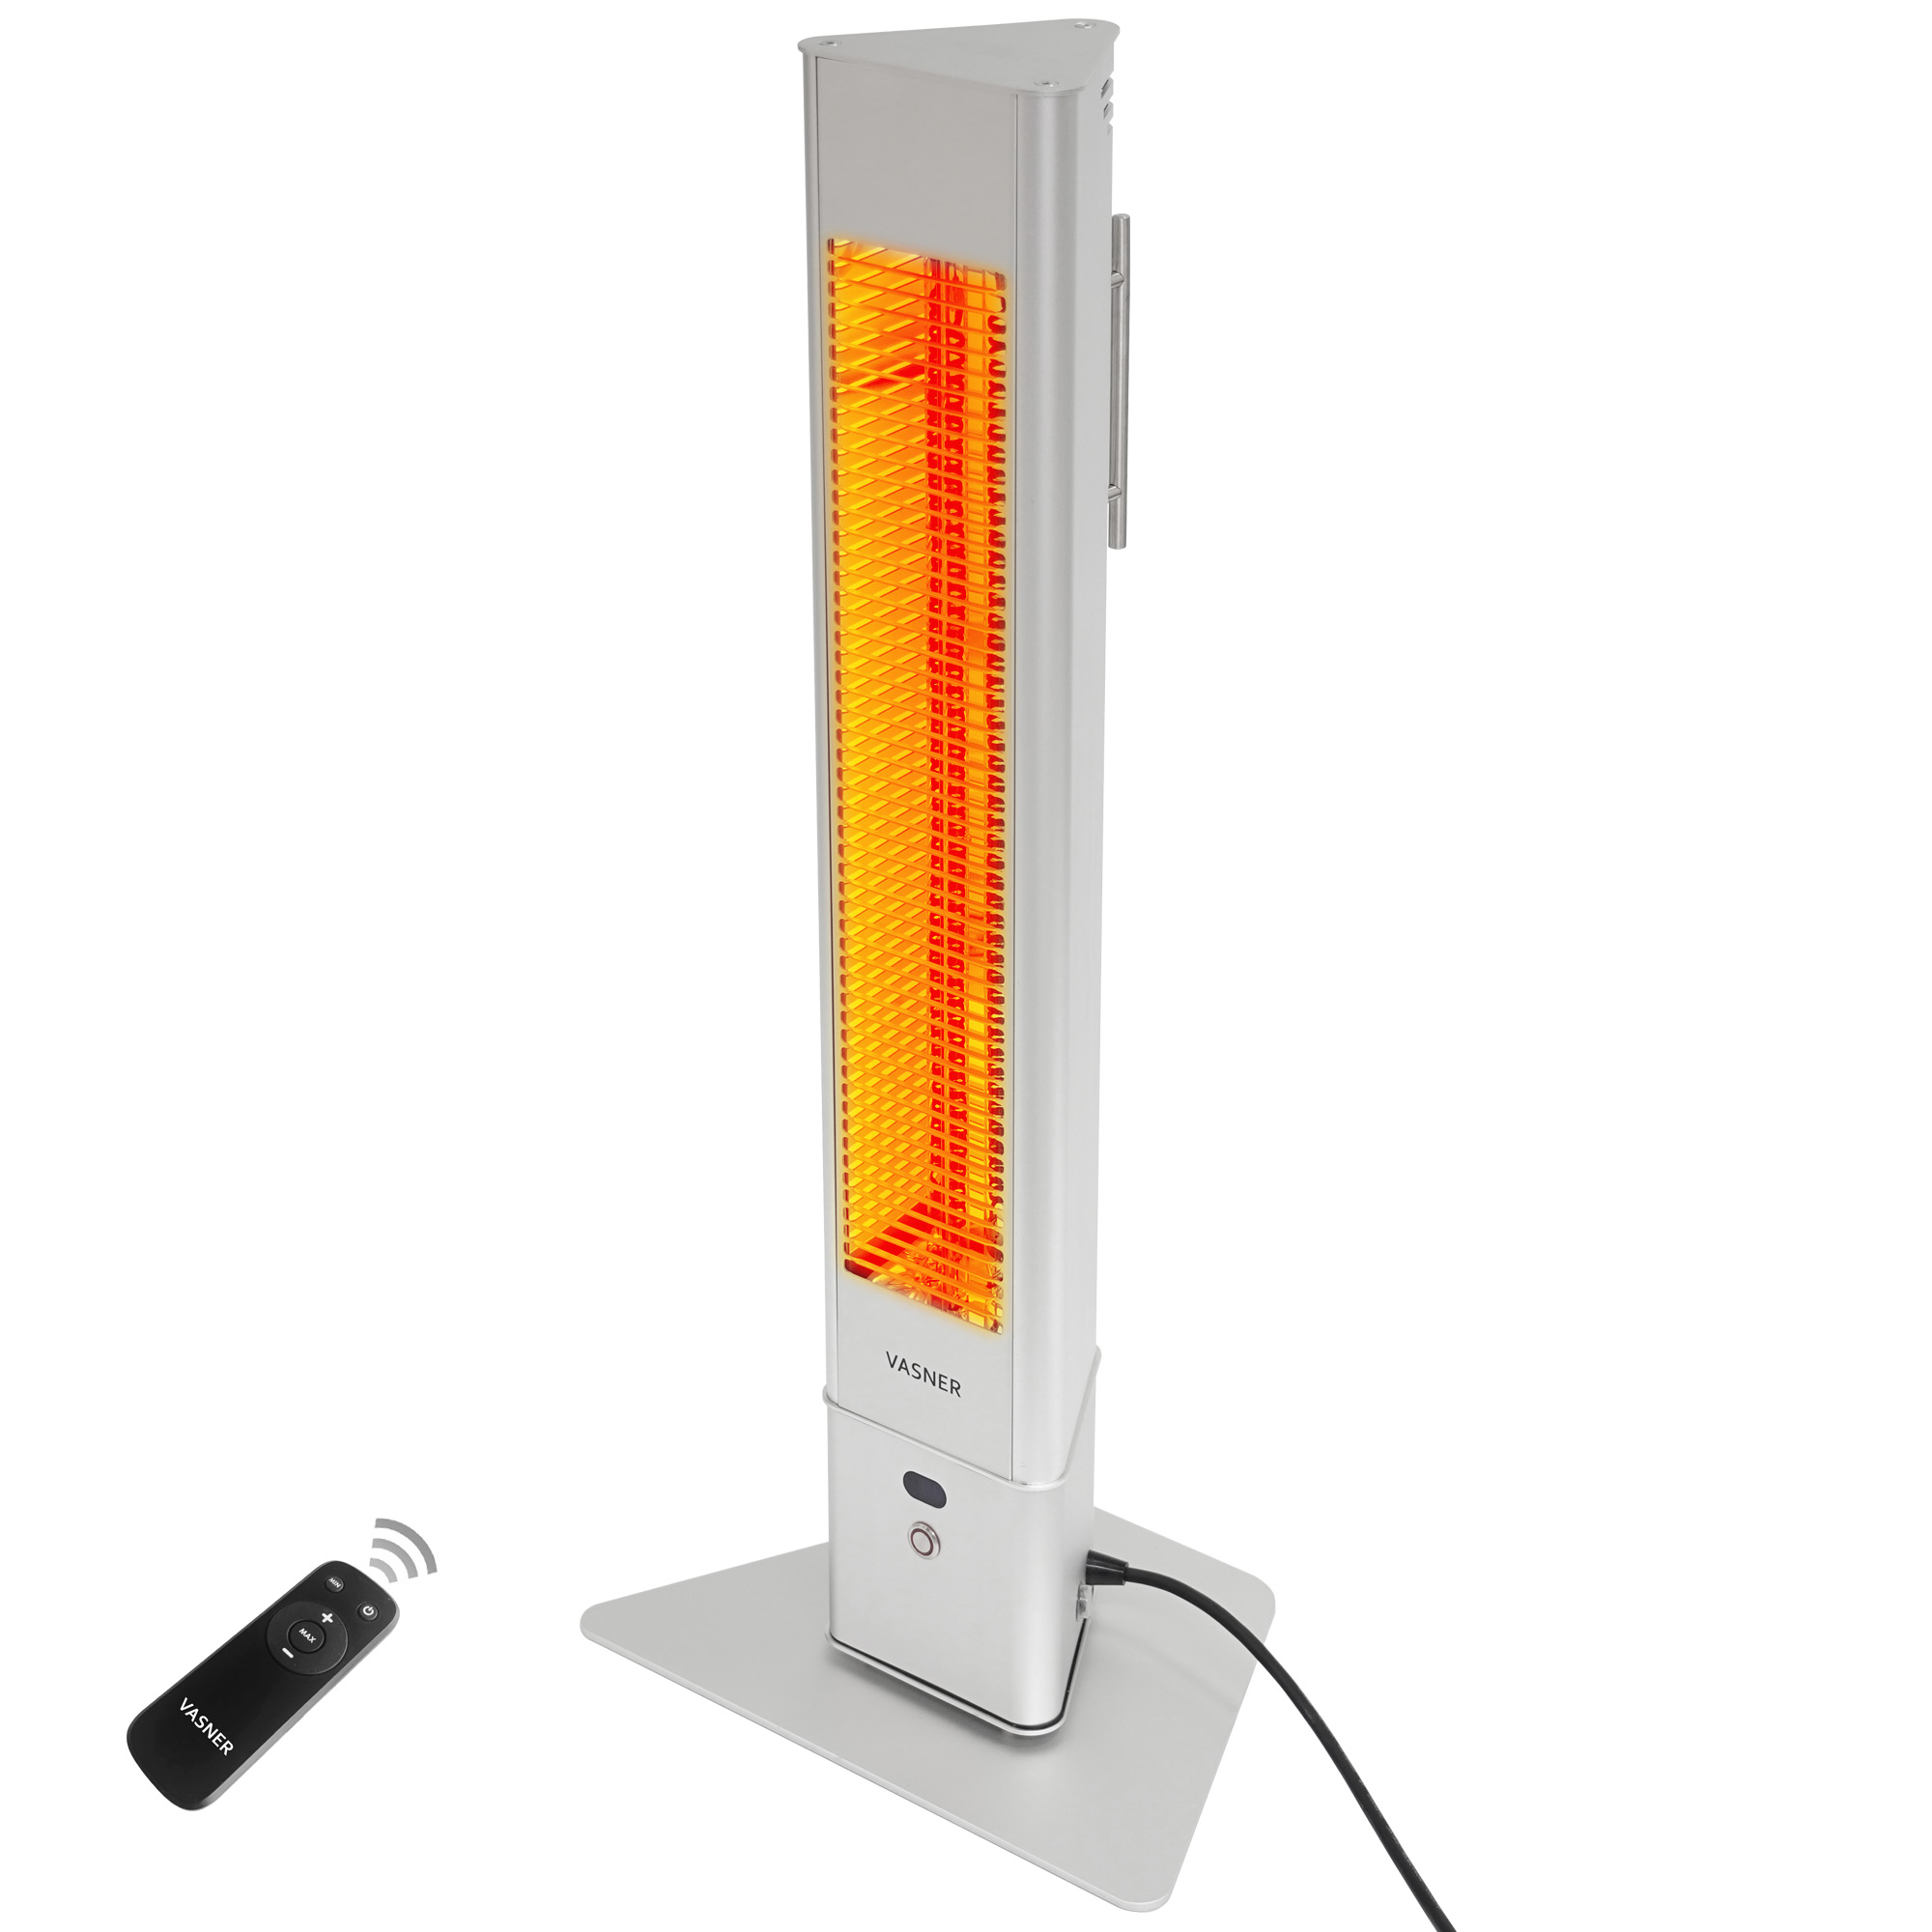 2500-watt-stand-up-heater-with-remote-control-4-heat-settings